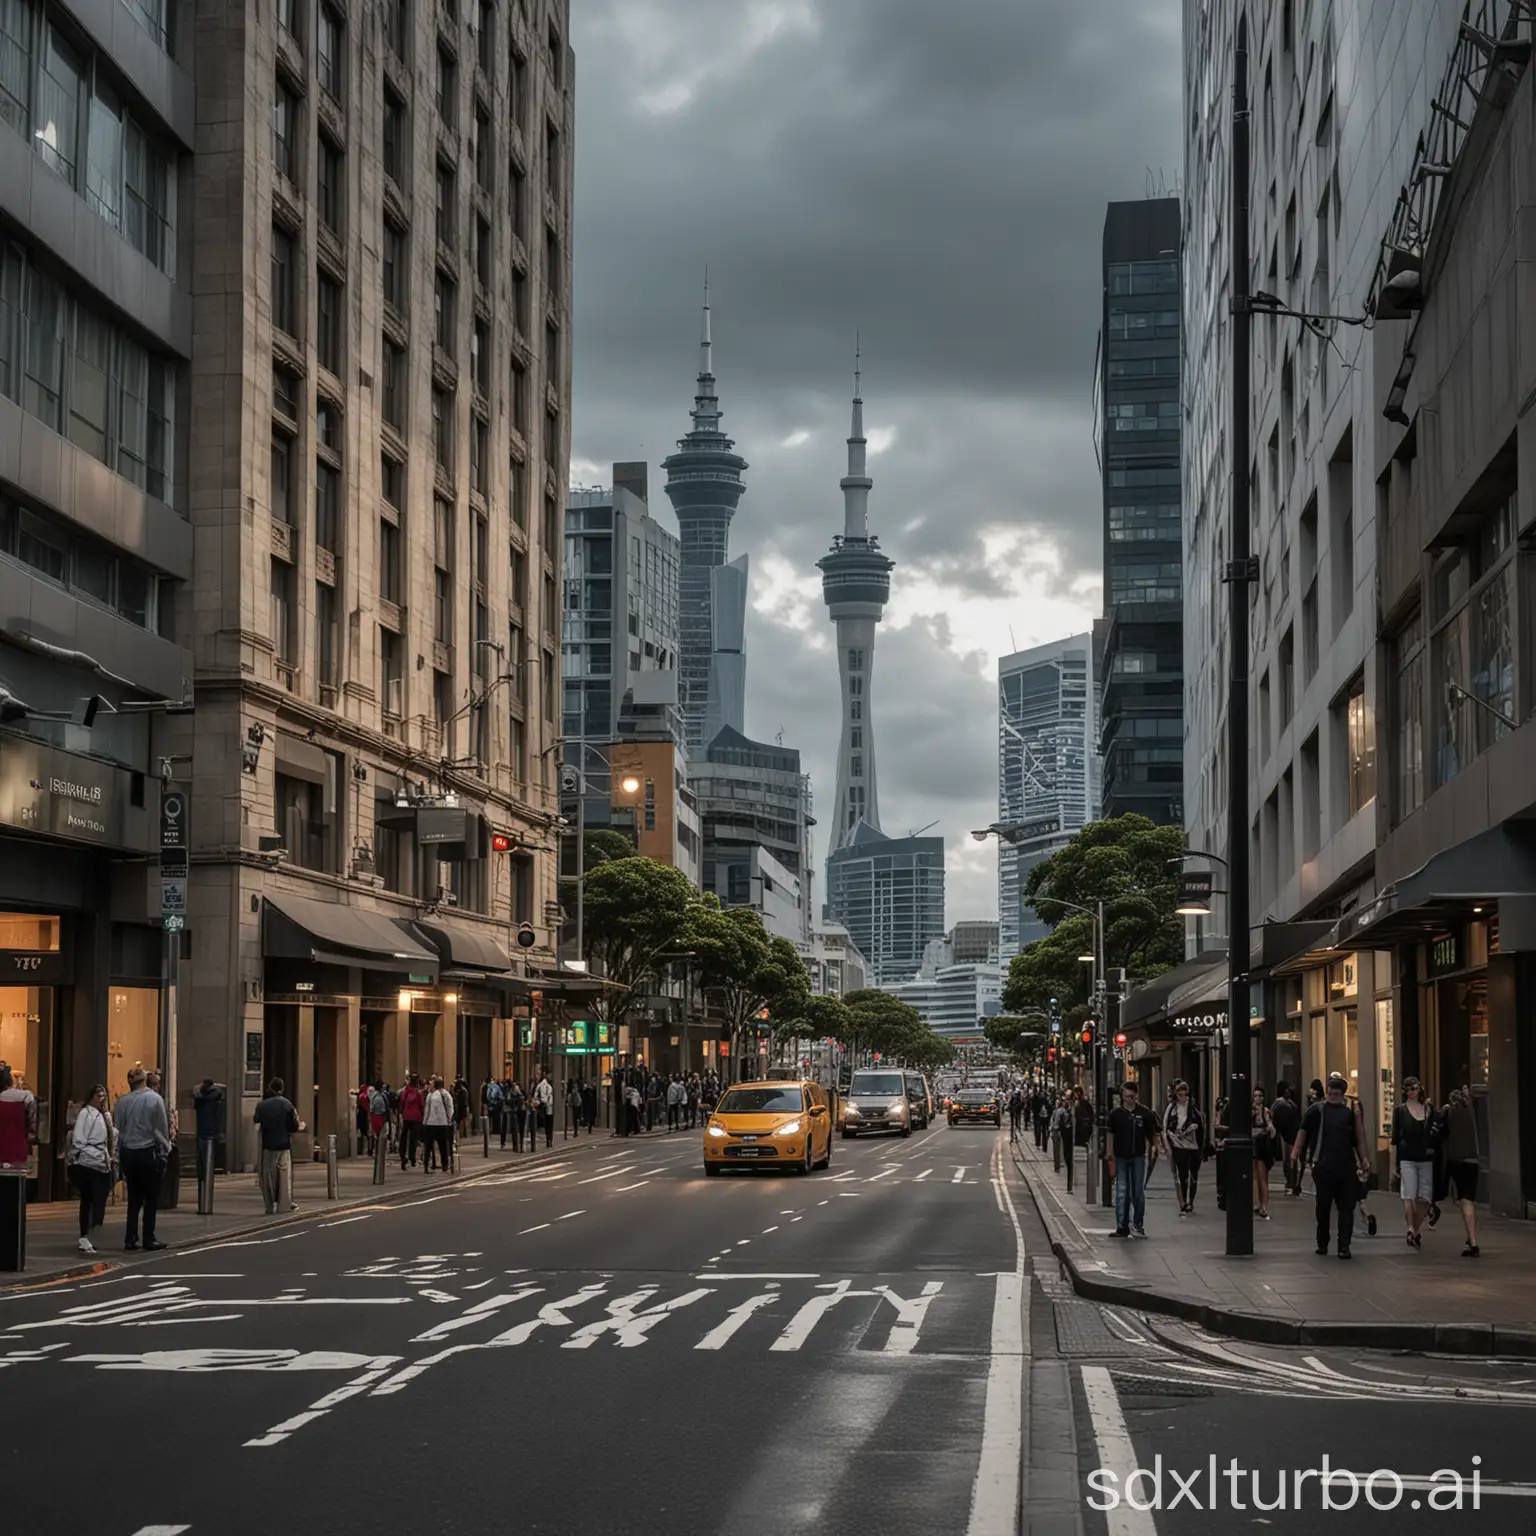 scene in Auckland CBD with buildings and skytower captured with a Canon EOS 90D camera using a 35-70mm lens on a 50.6 megapixel sensor. The lighting is cinematic, ultra realistic with dusk lighting filtering through the clouds and casting long shadows across the busy streets. The scene is rendered in 16k resolution, showcasing the extreme detail of the architecture, foliage, and people. A hyperrealistic scene with maximum resolution.